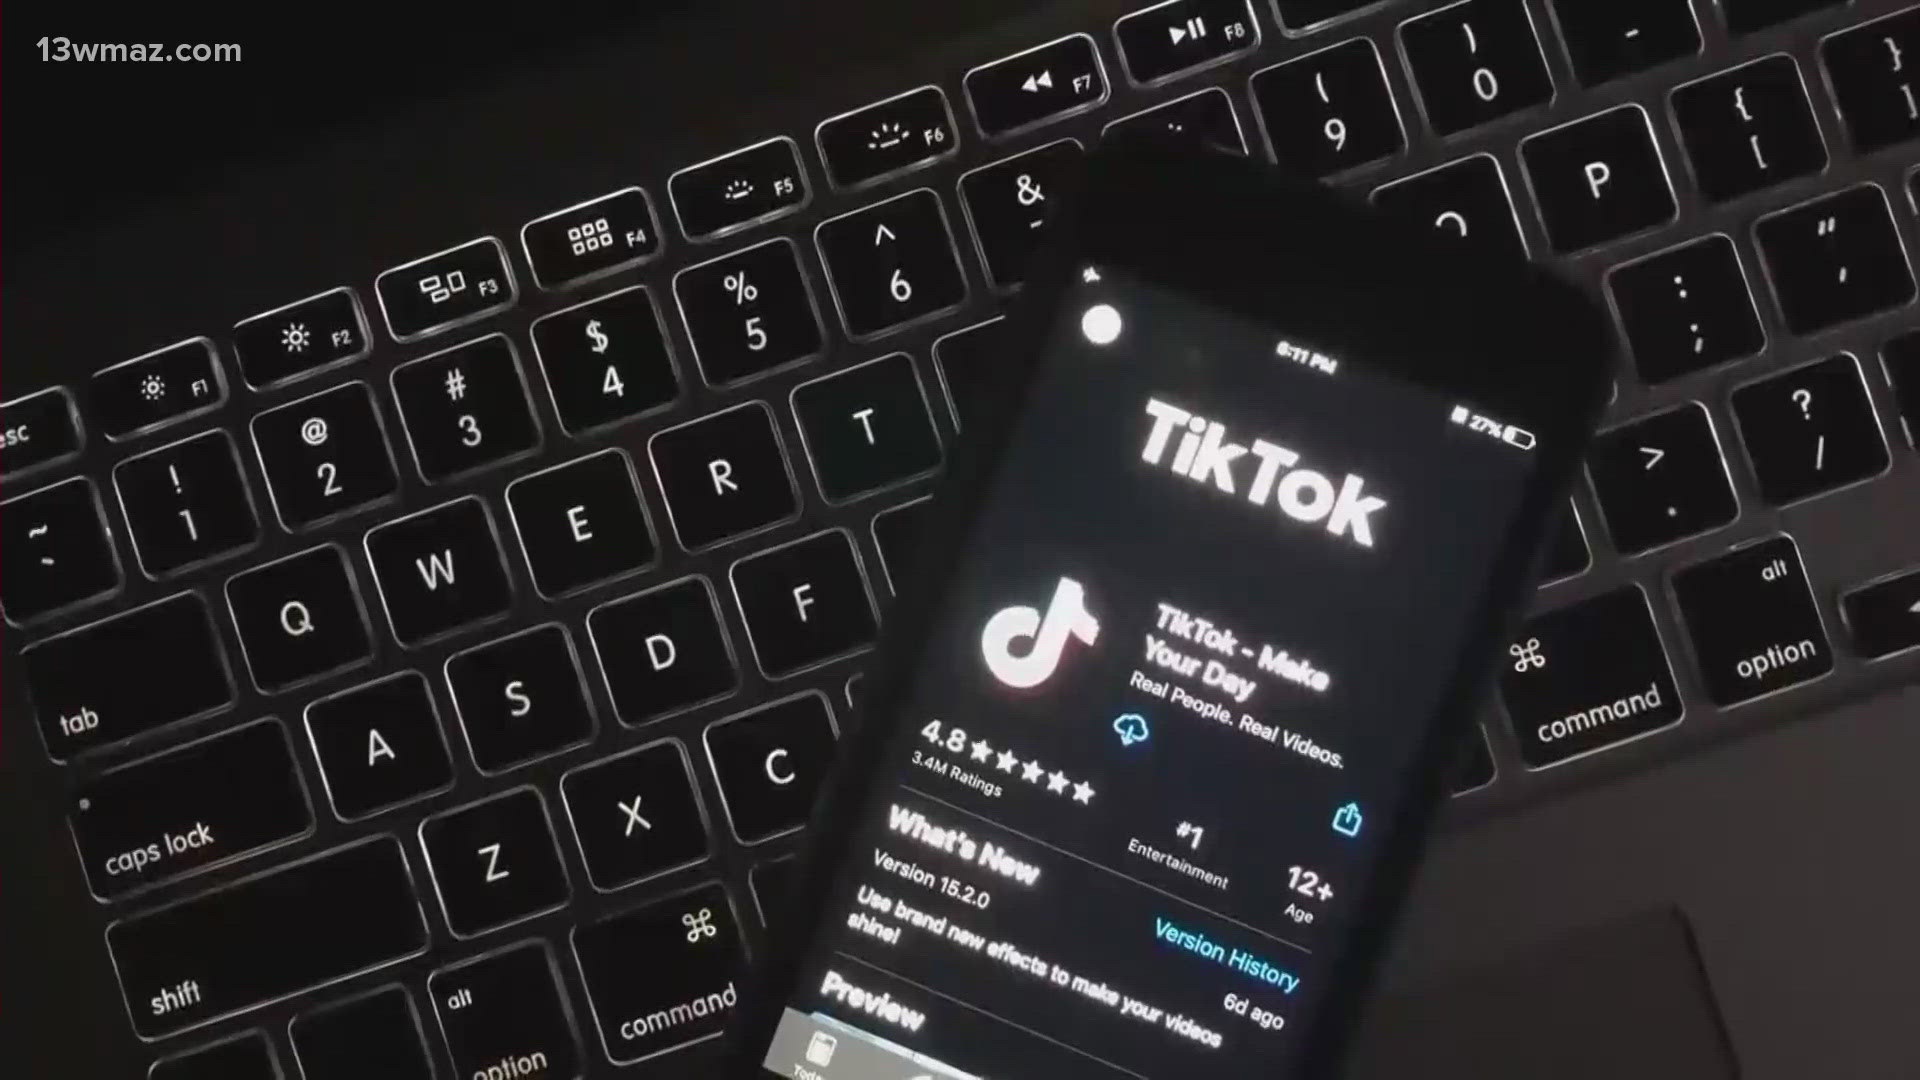 An associate professor said the bill passed by Congress is necessary because of TikTok is a security threat. But one user says it changed his life